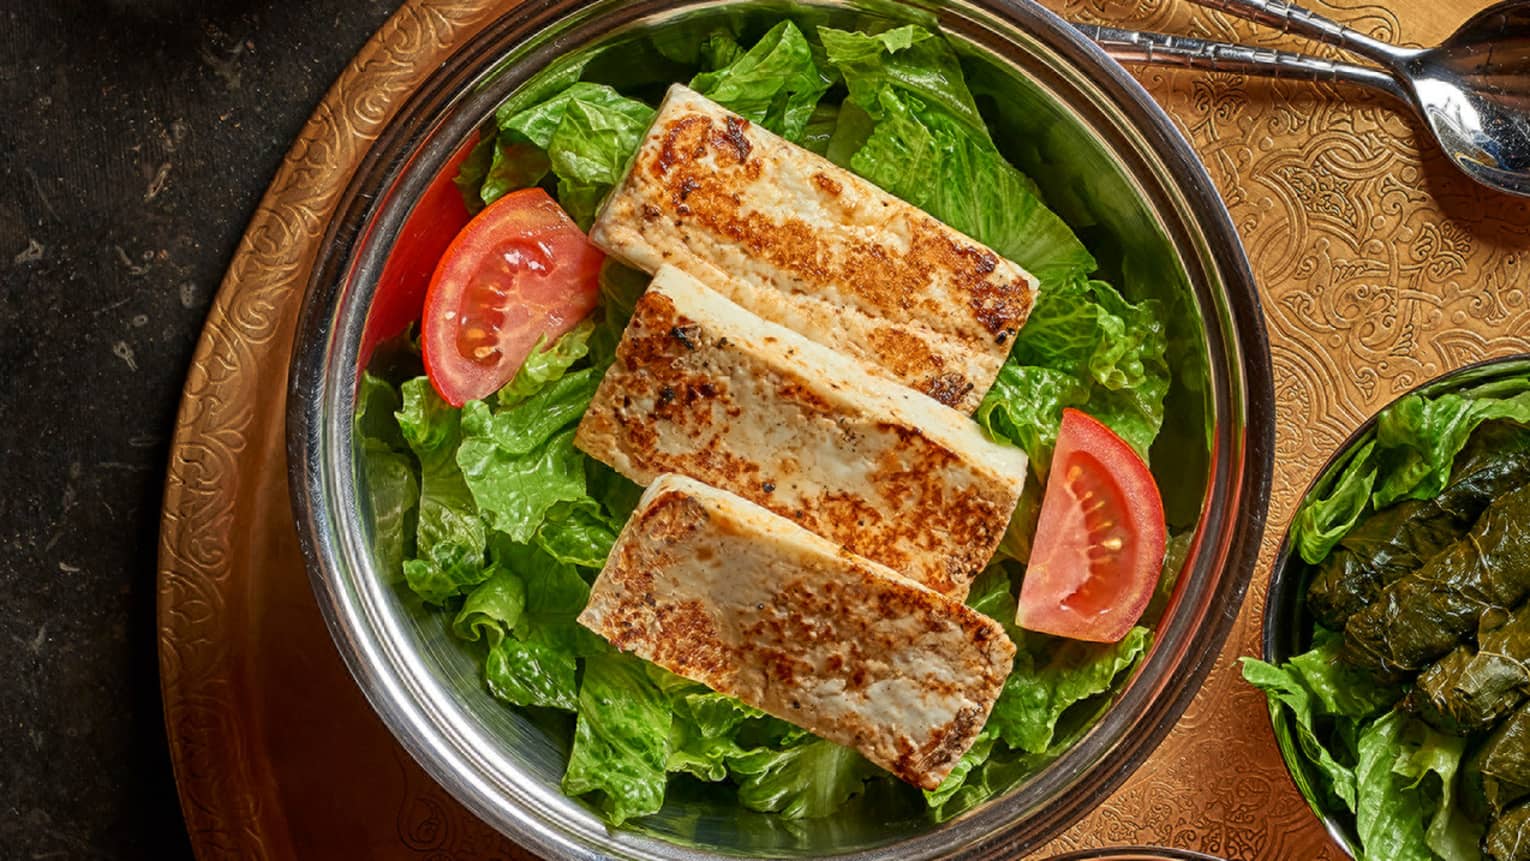 Three strips of fried Halloumi cheese on bed of lettuce in bowl, tomato wedge